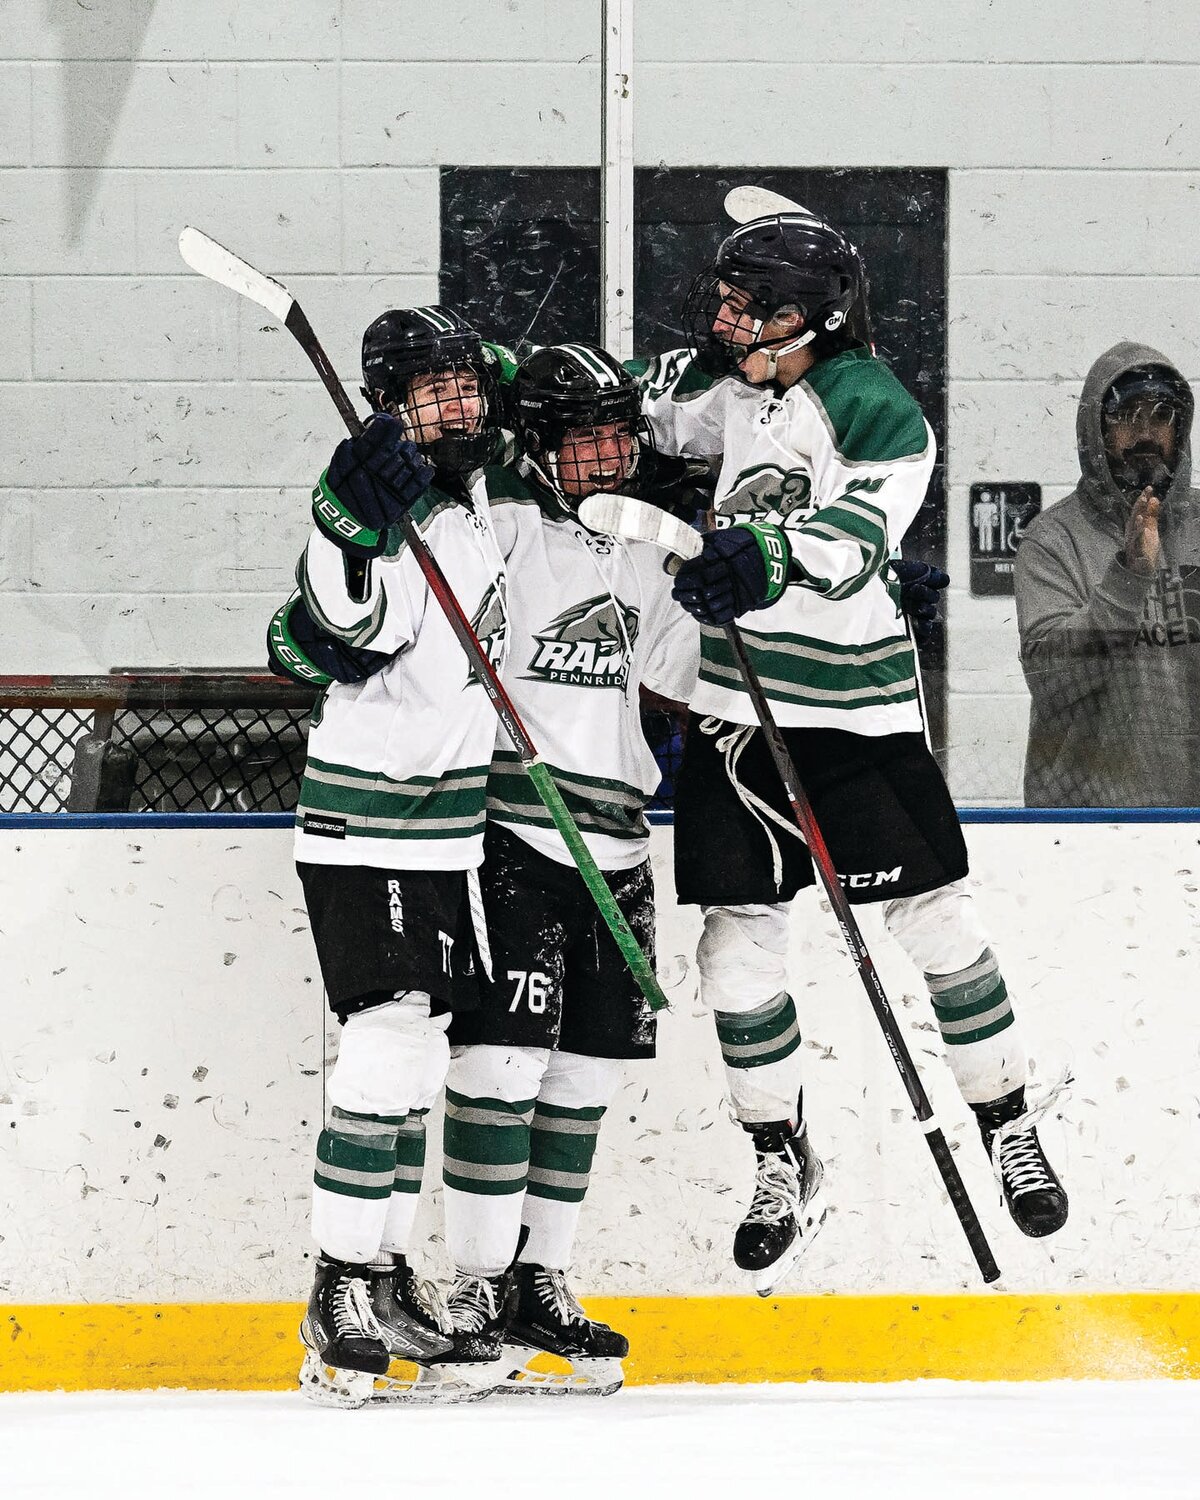 Pennridge players celebrate Shane Dachowski’s second period goal, putting the Rams up 3-1 at the 9:00 mark.